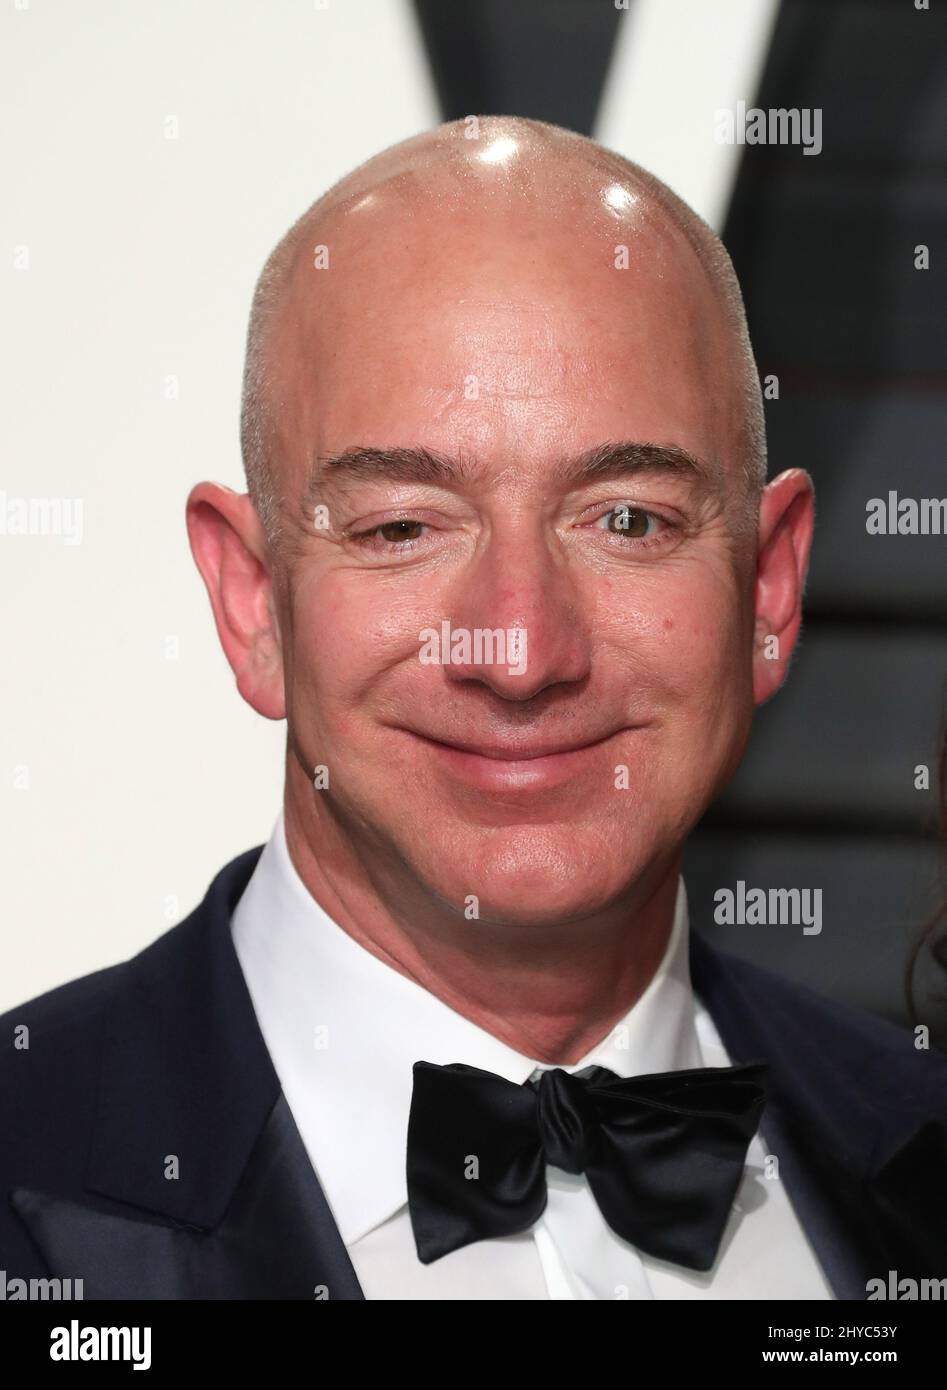 Jeff Bezos arriving at the Vanity Fair Oscar Party in Beverly Hills, Los Angeles, USA. Stock Photo